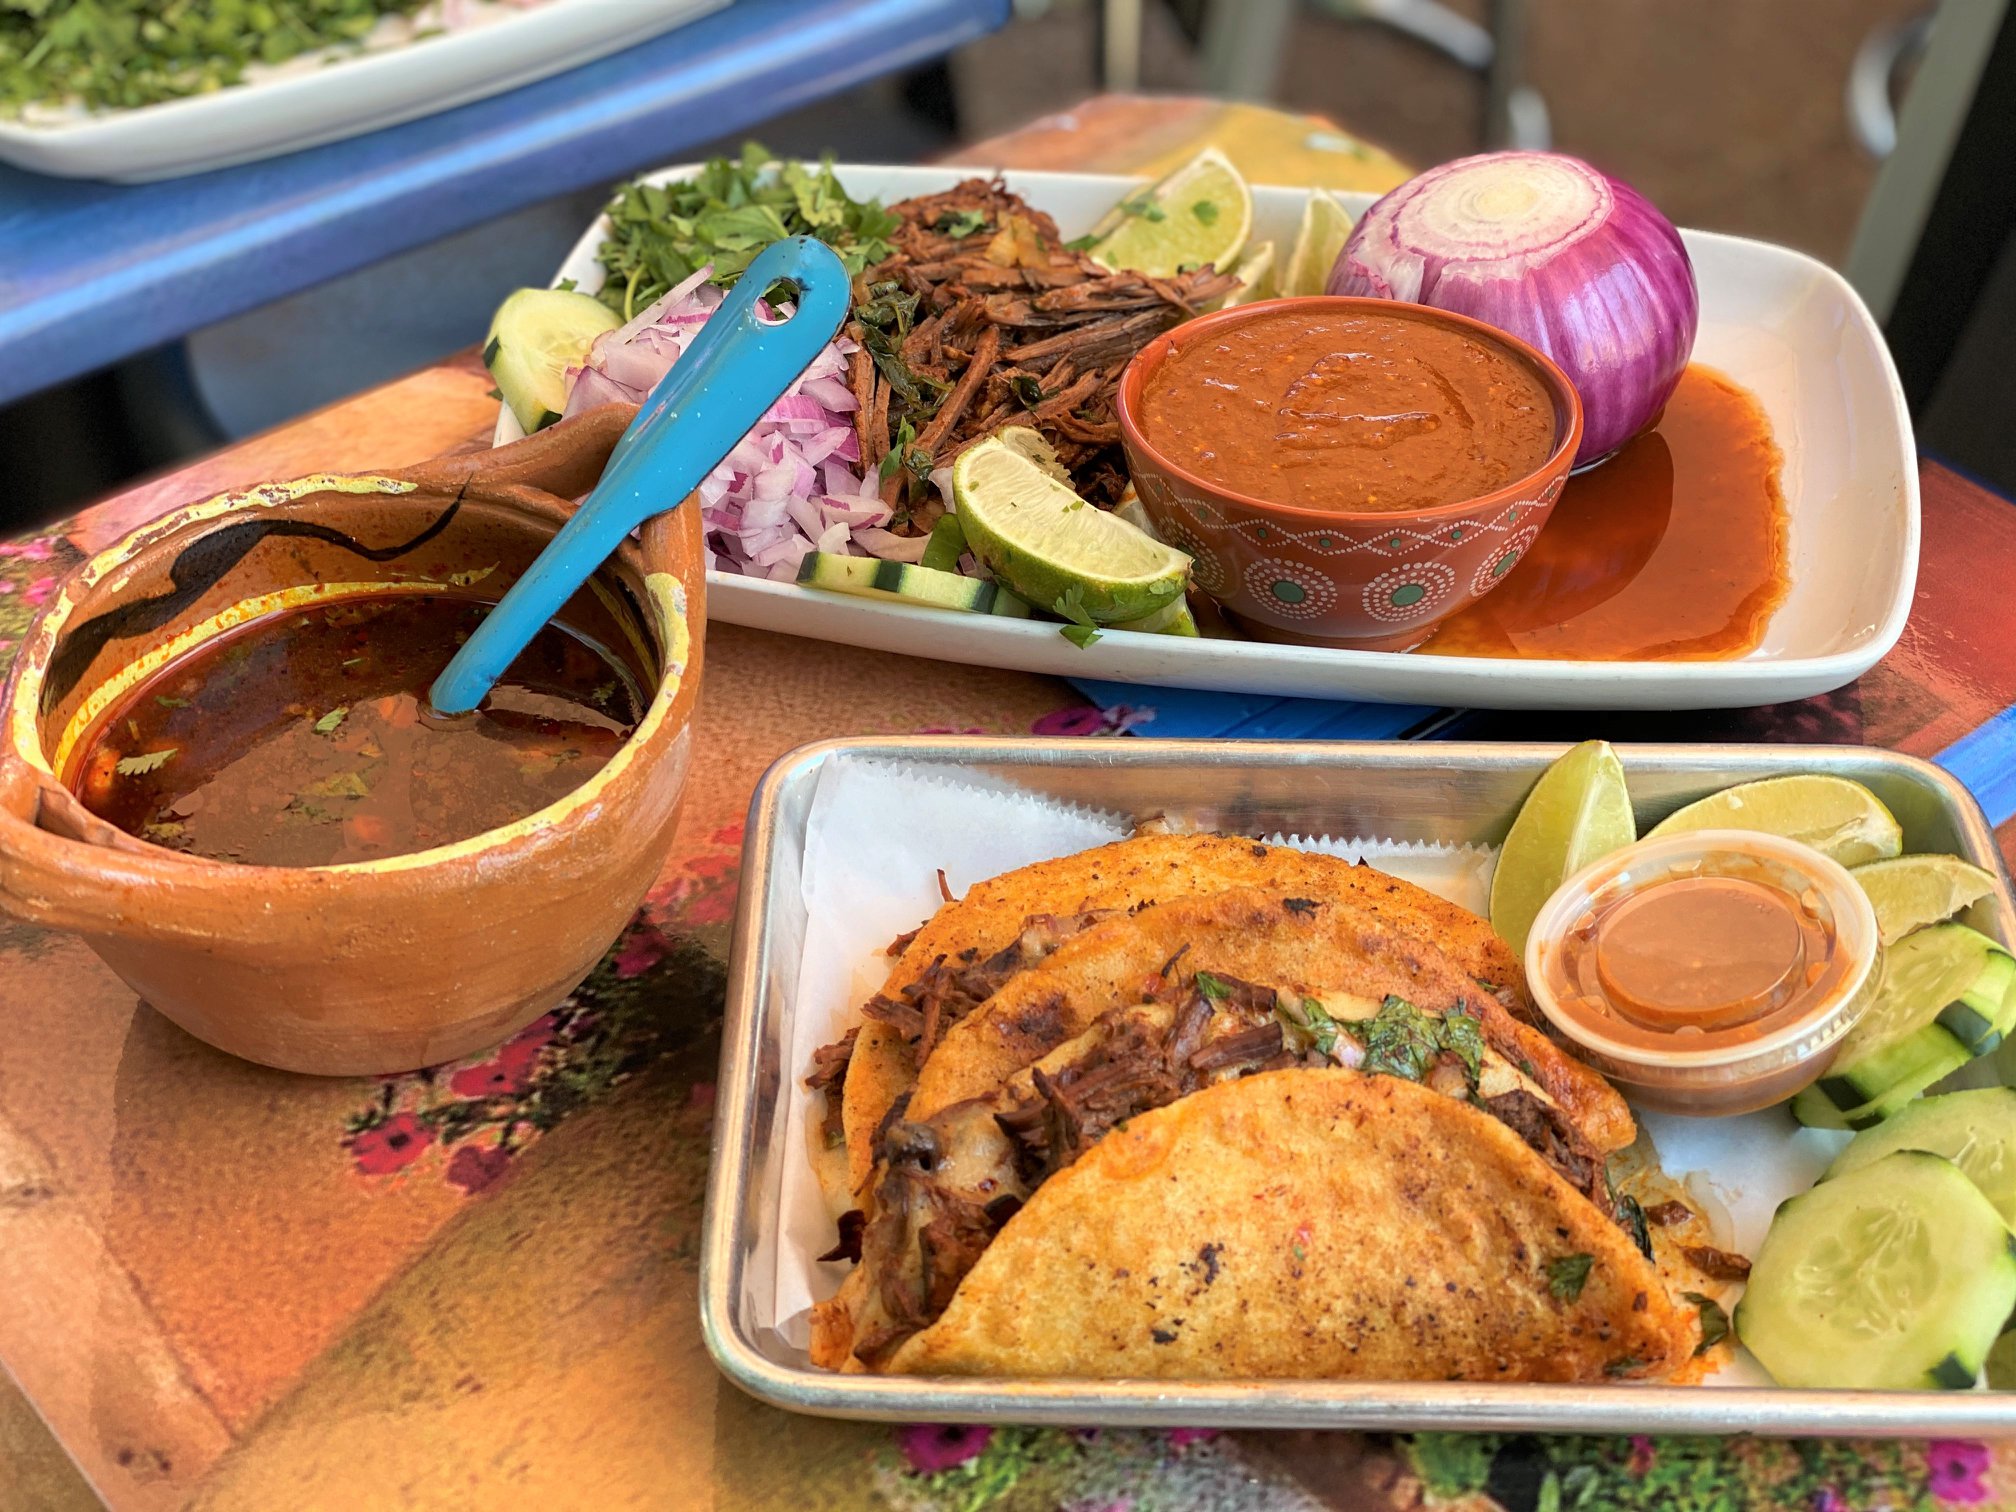 A tablescape of tacos: a tray with taco fixins, salsa, veggies; another tray with quesabirra tacos with a side of dipping stew.